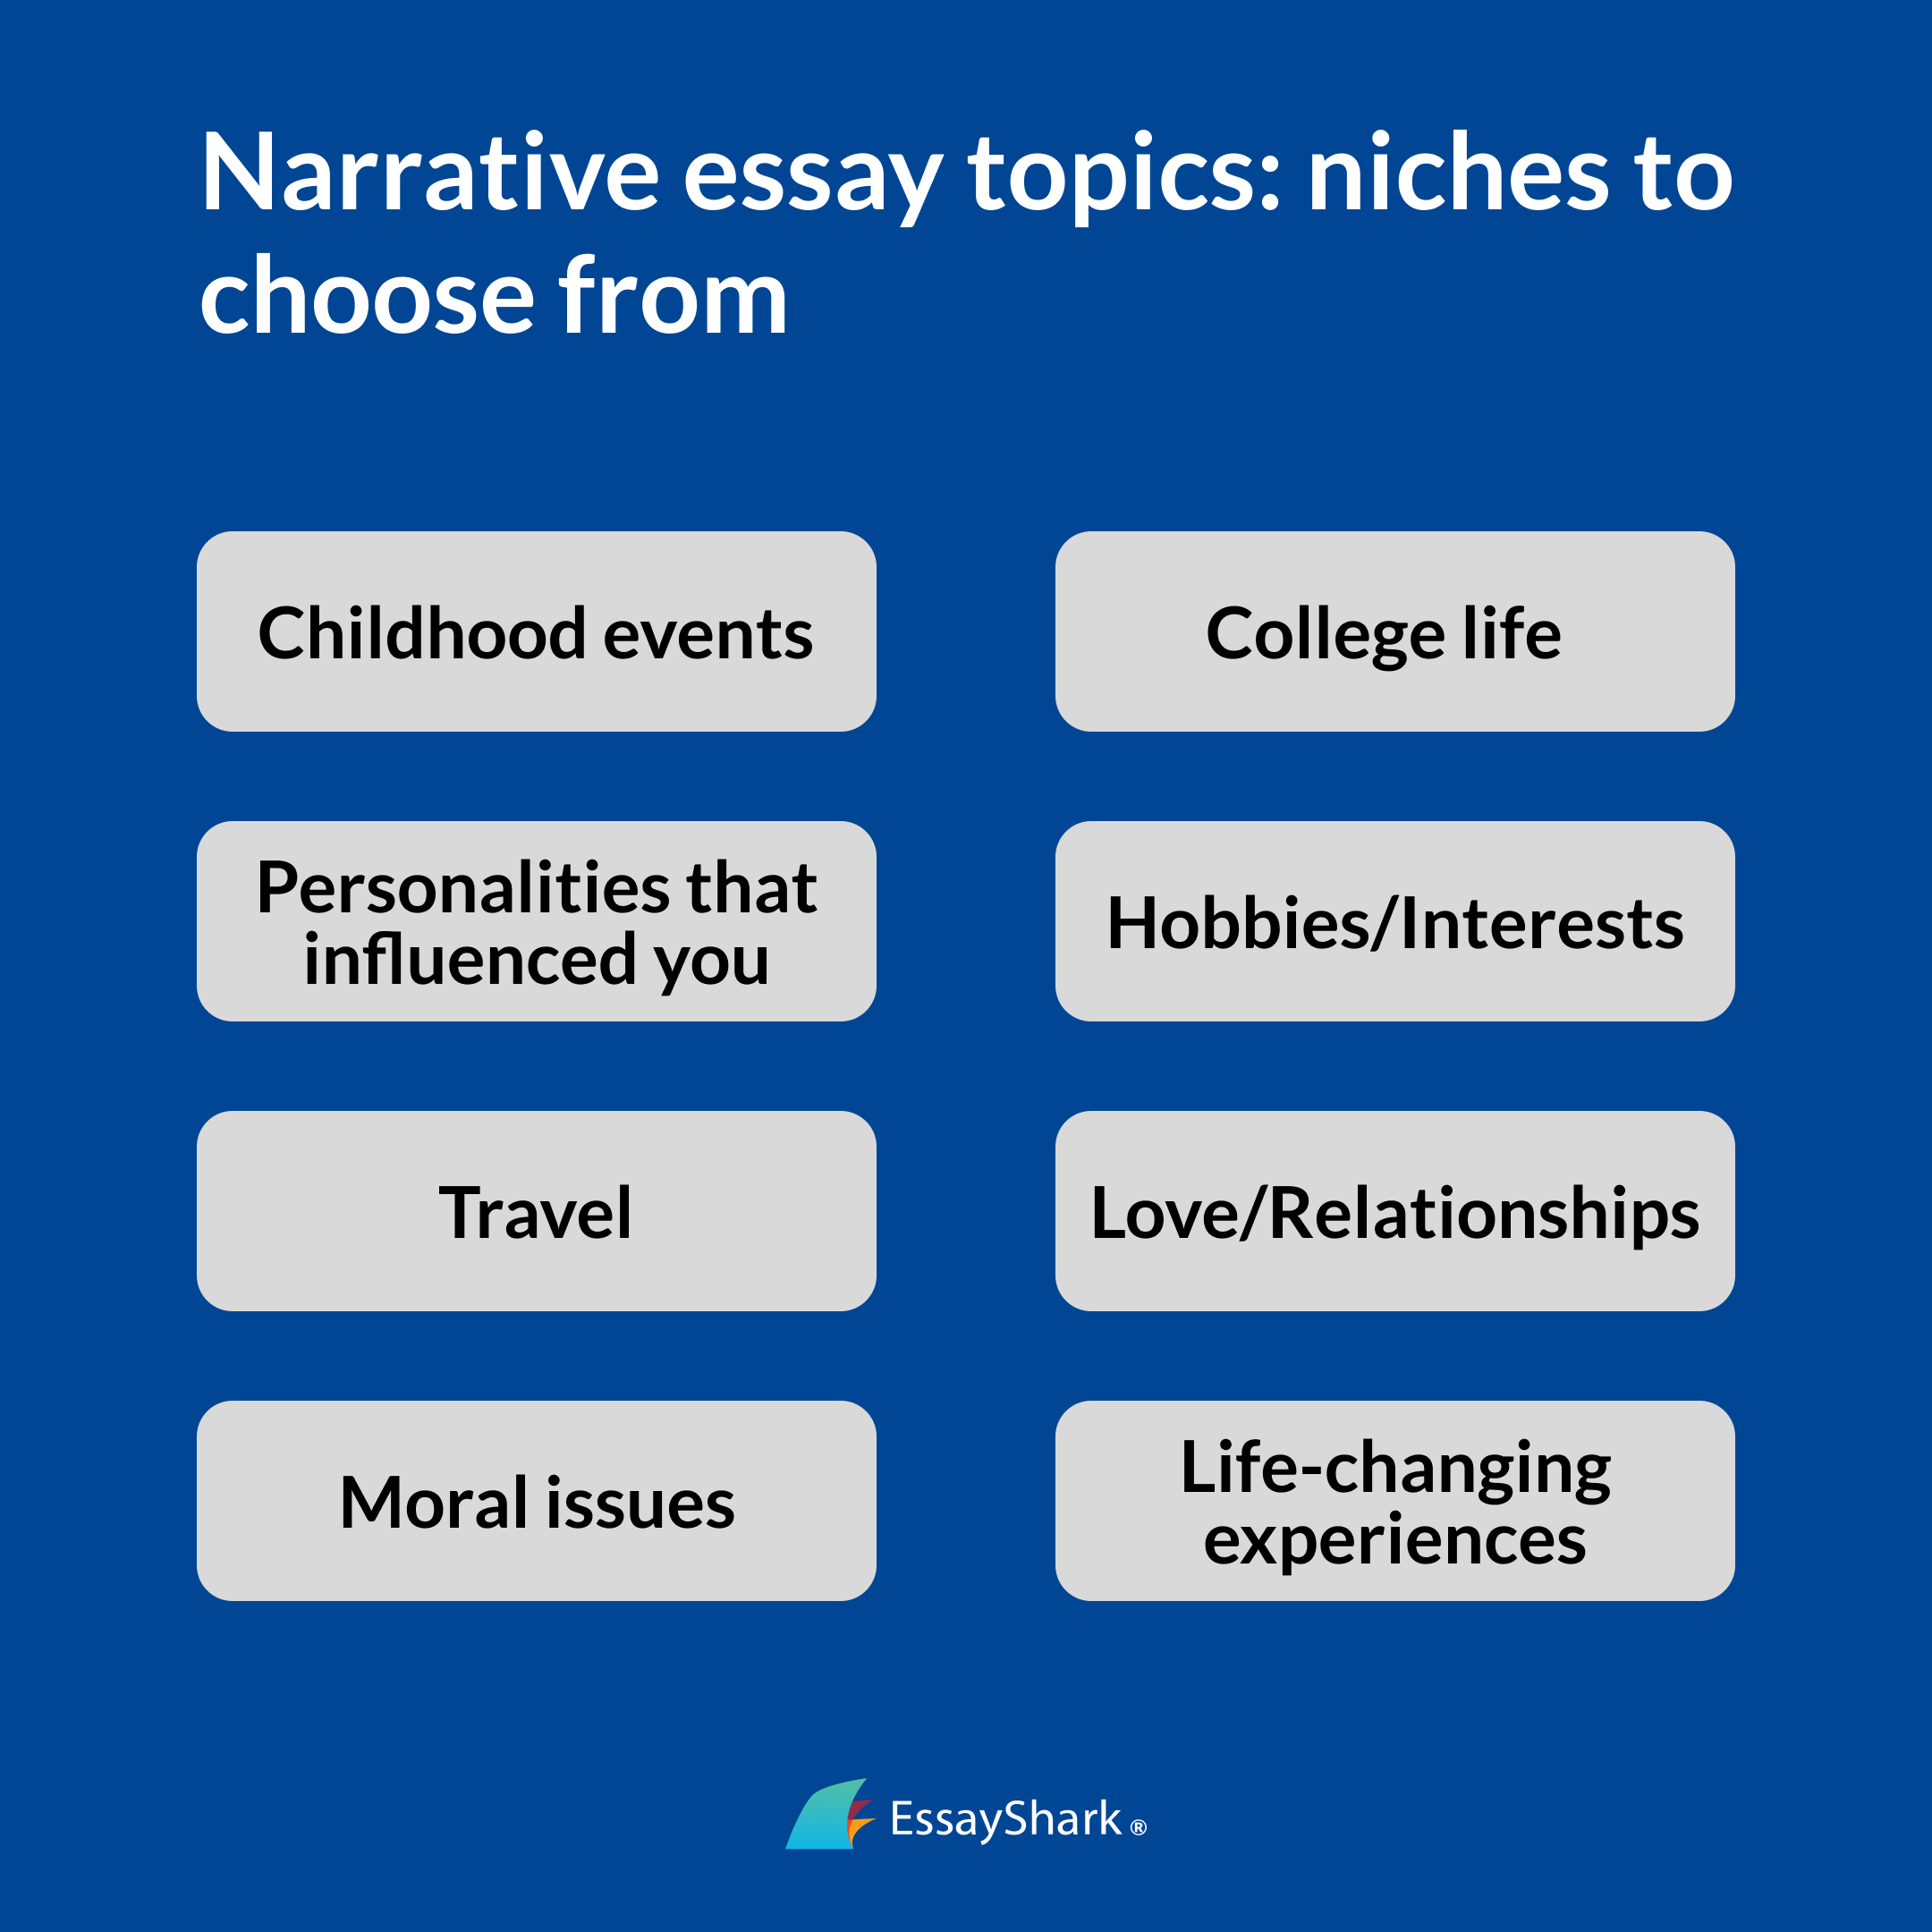 Narrative Essay Topics Niches to Choose From